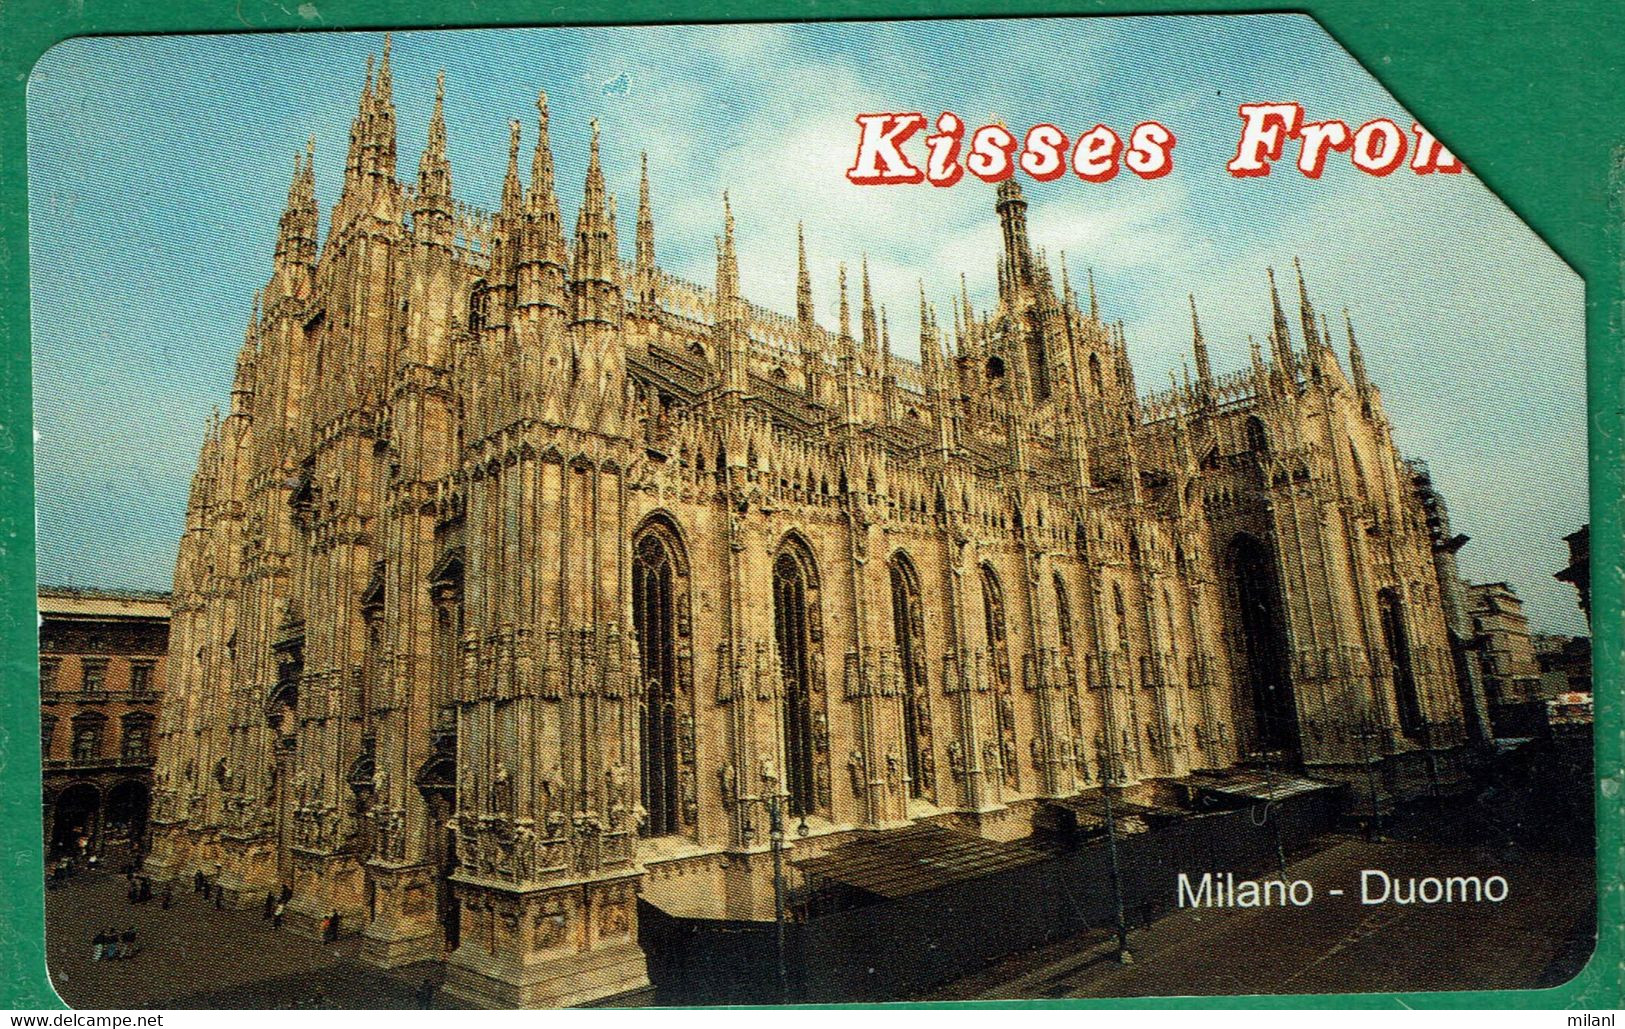 Kisses From - Milano - Duomo - Public Practical Advertising